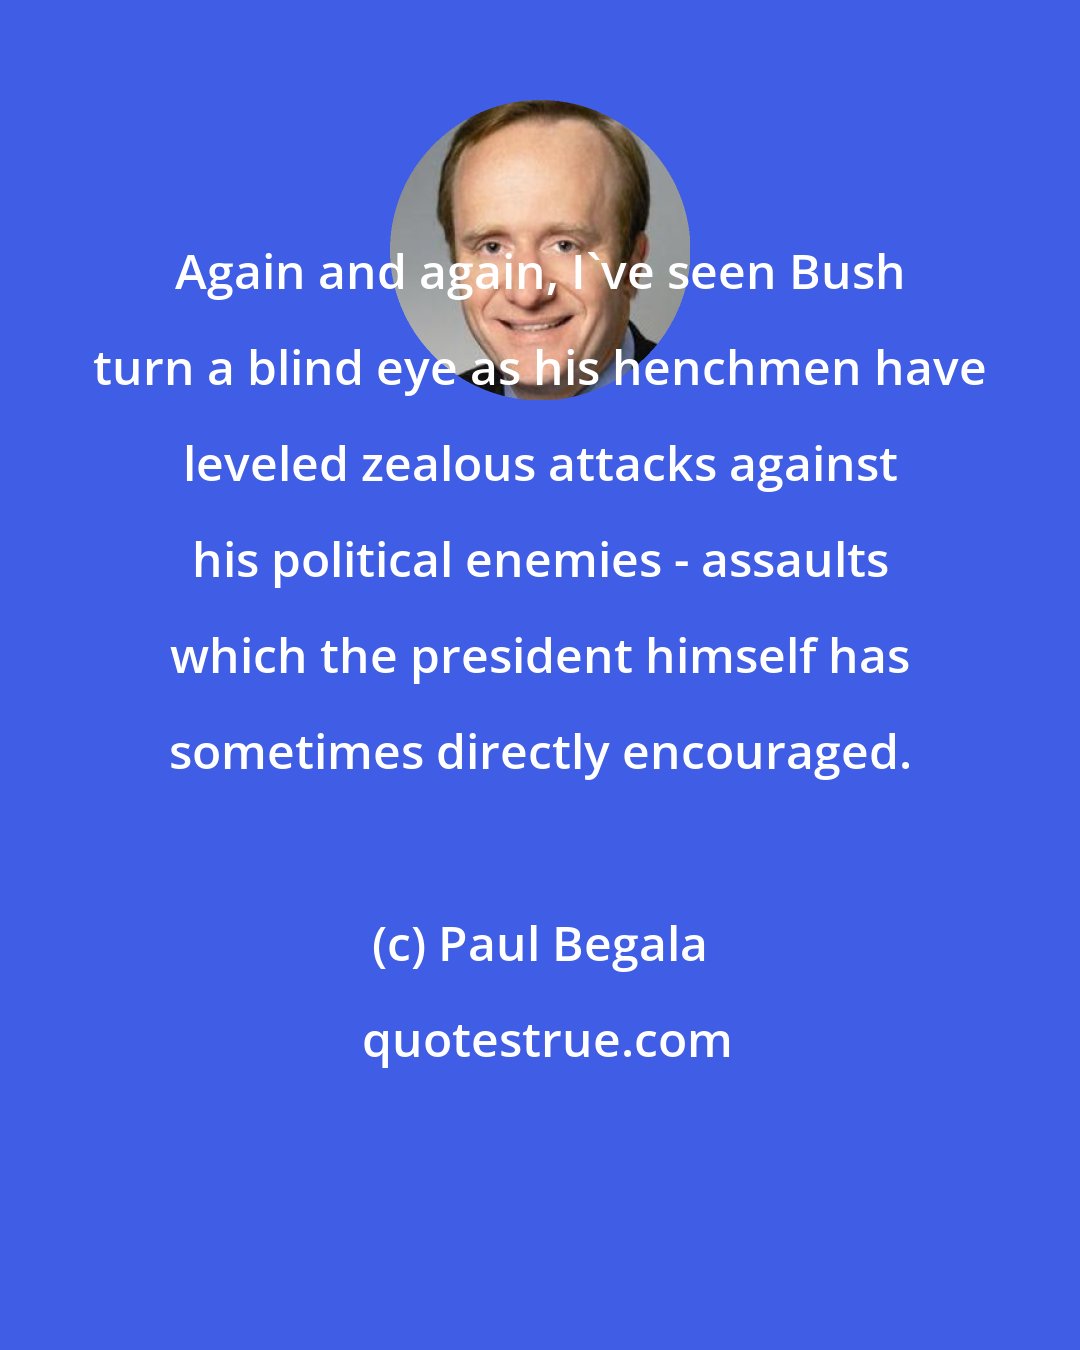 Paul Begala: Again and again, I've seen Bush turn a blind eye as his henchmen have leveled zealous attacks against his political enemies - assaults which the president himself has sometimes directly encouraged.